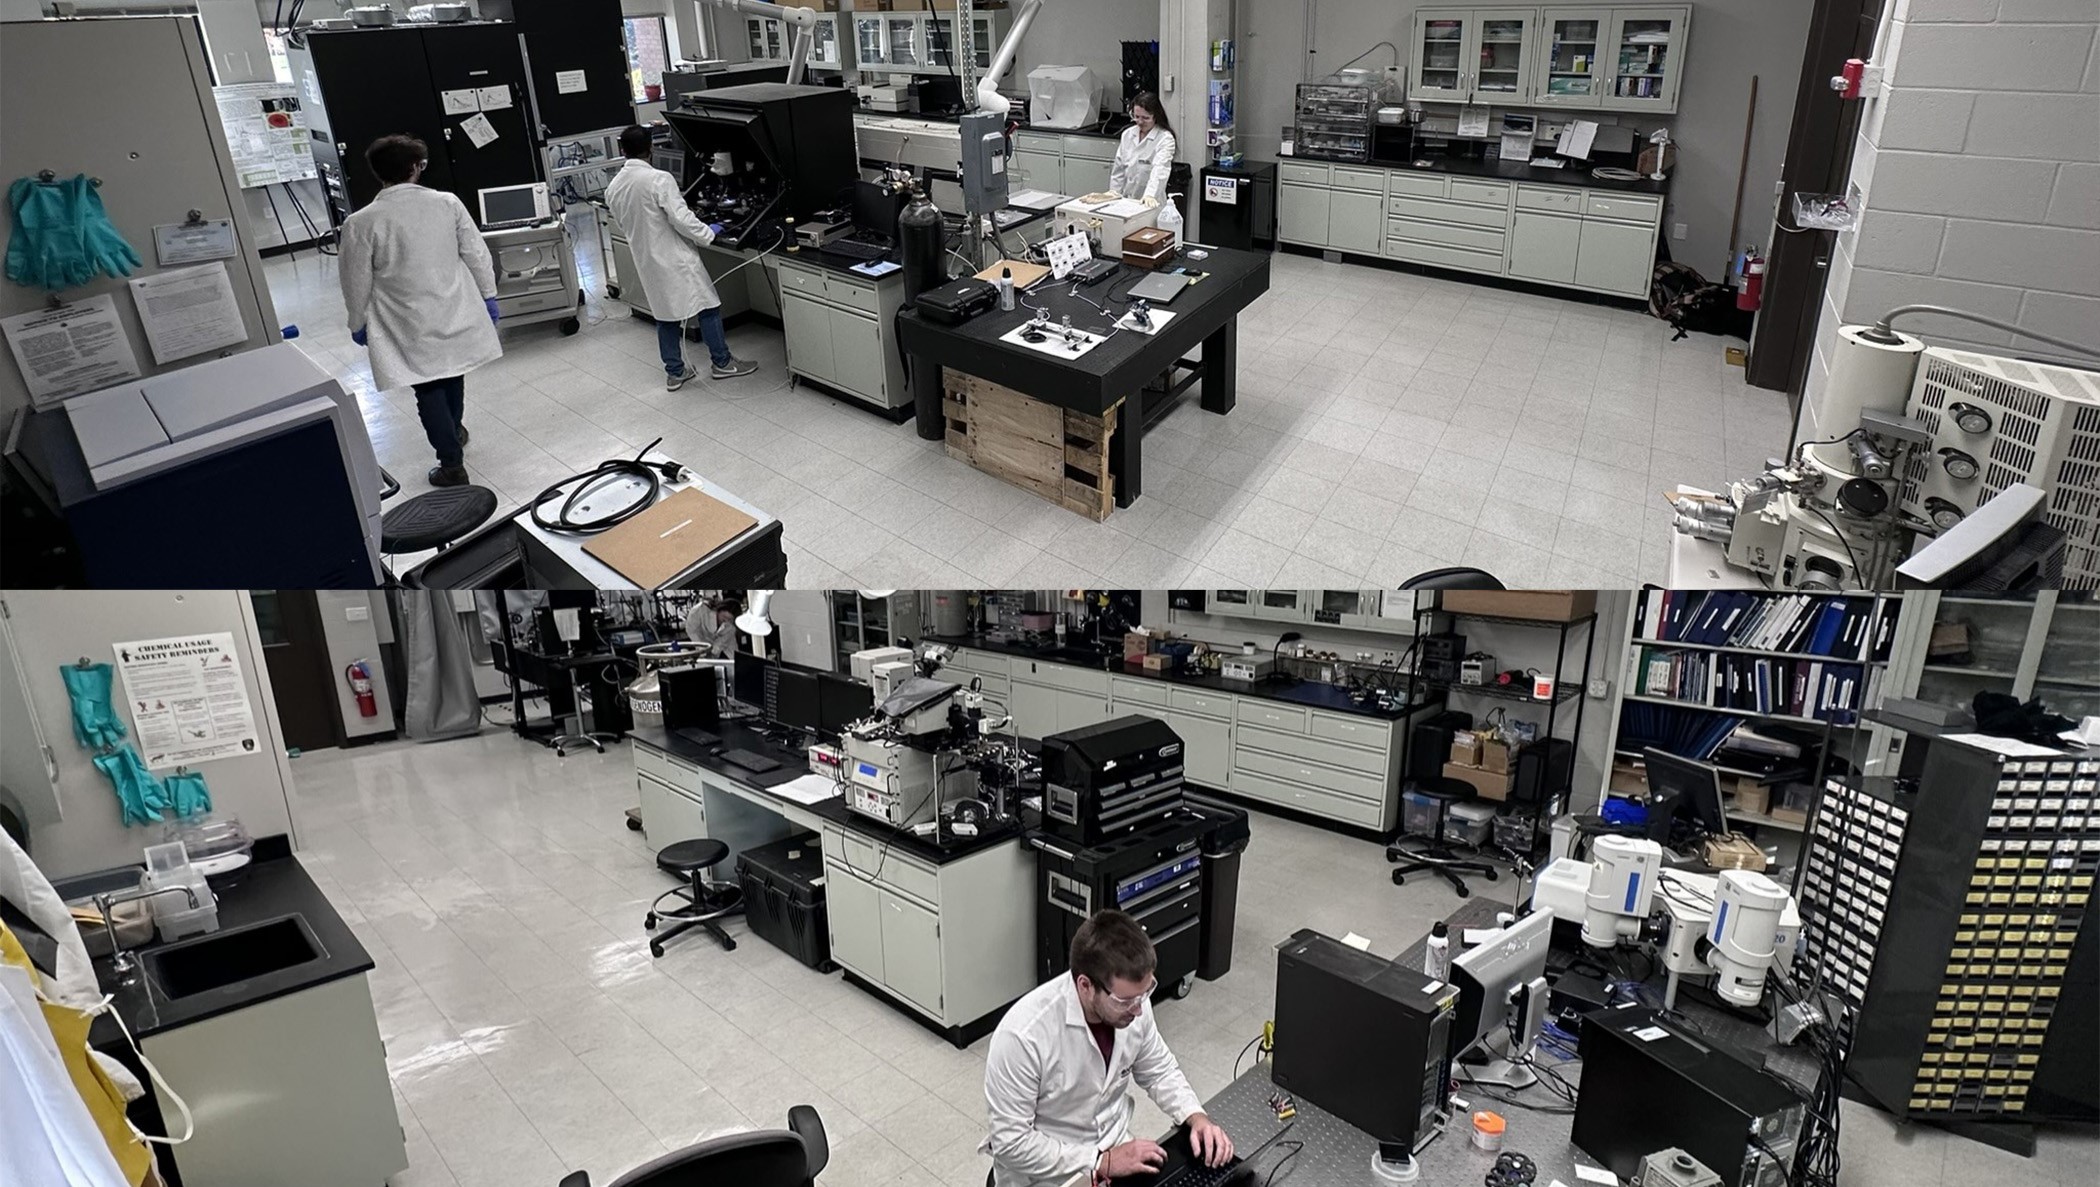 A split picture overhead view of the Optoelectronics Characterization Lab. The top having 3 people working around a centralized lab bench, the bottom having  a person sitting at an optical table with computers and instrumentation in front of  him and lab benches behind him. 